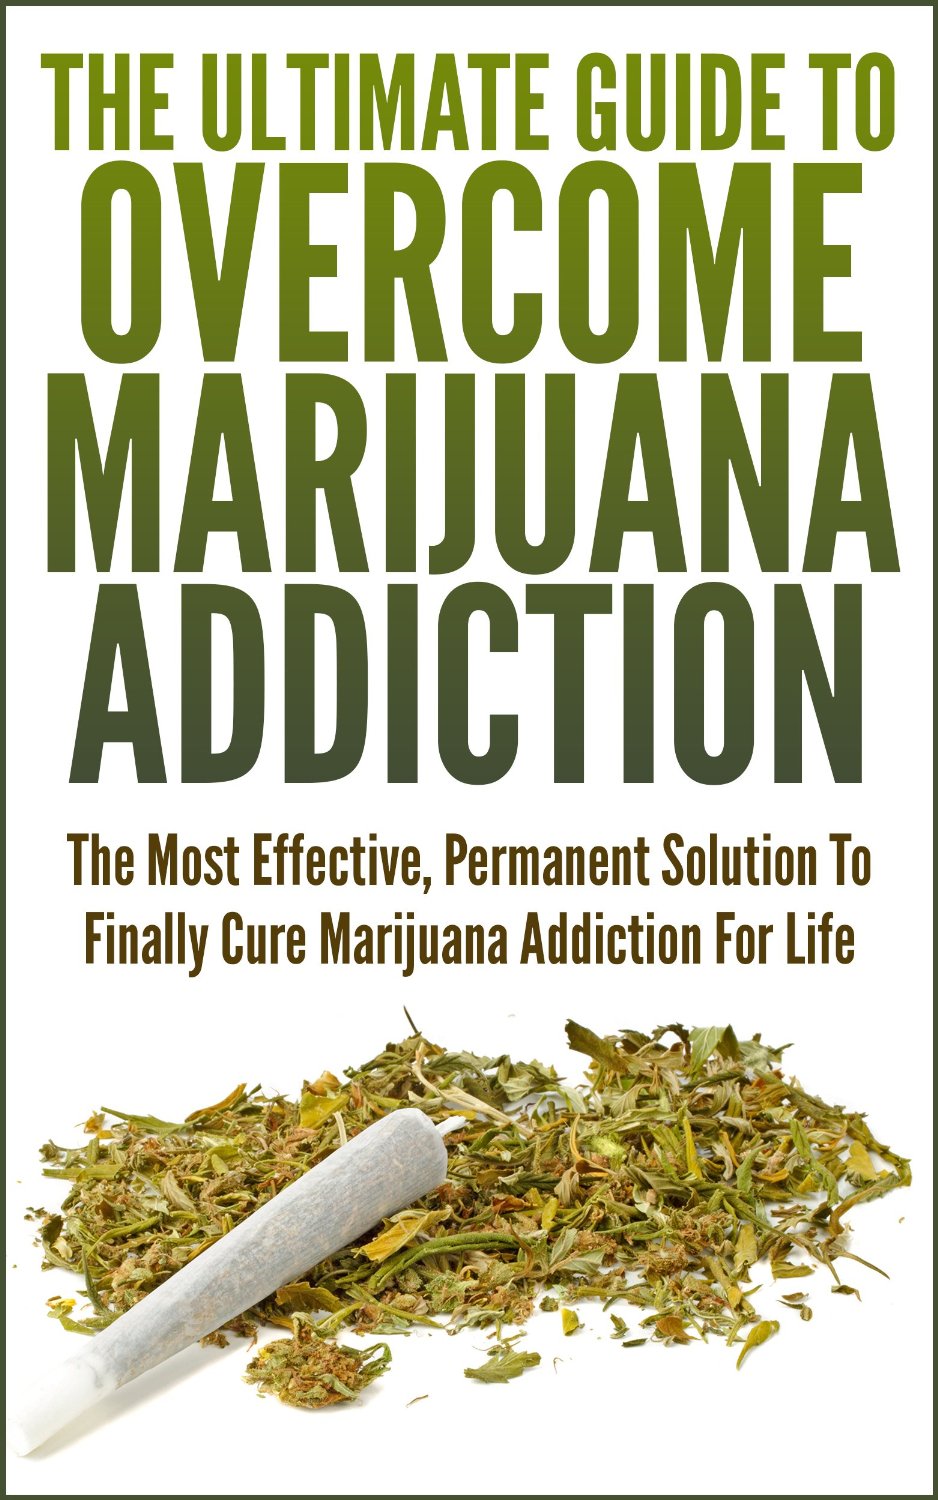 The Ultimate Guide To Overcome Marijuana Addiction: The Most Effective, Permanent Solution To Finally Cure Marijuana Addiction For Life by John K.